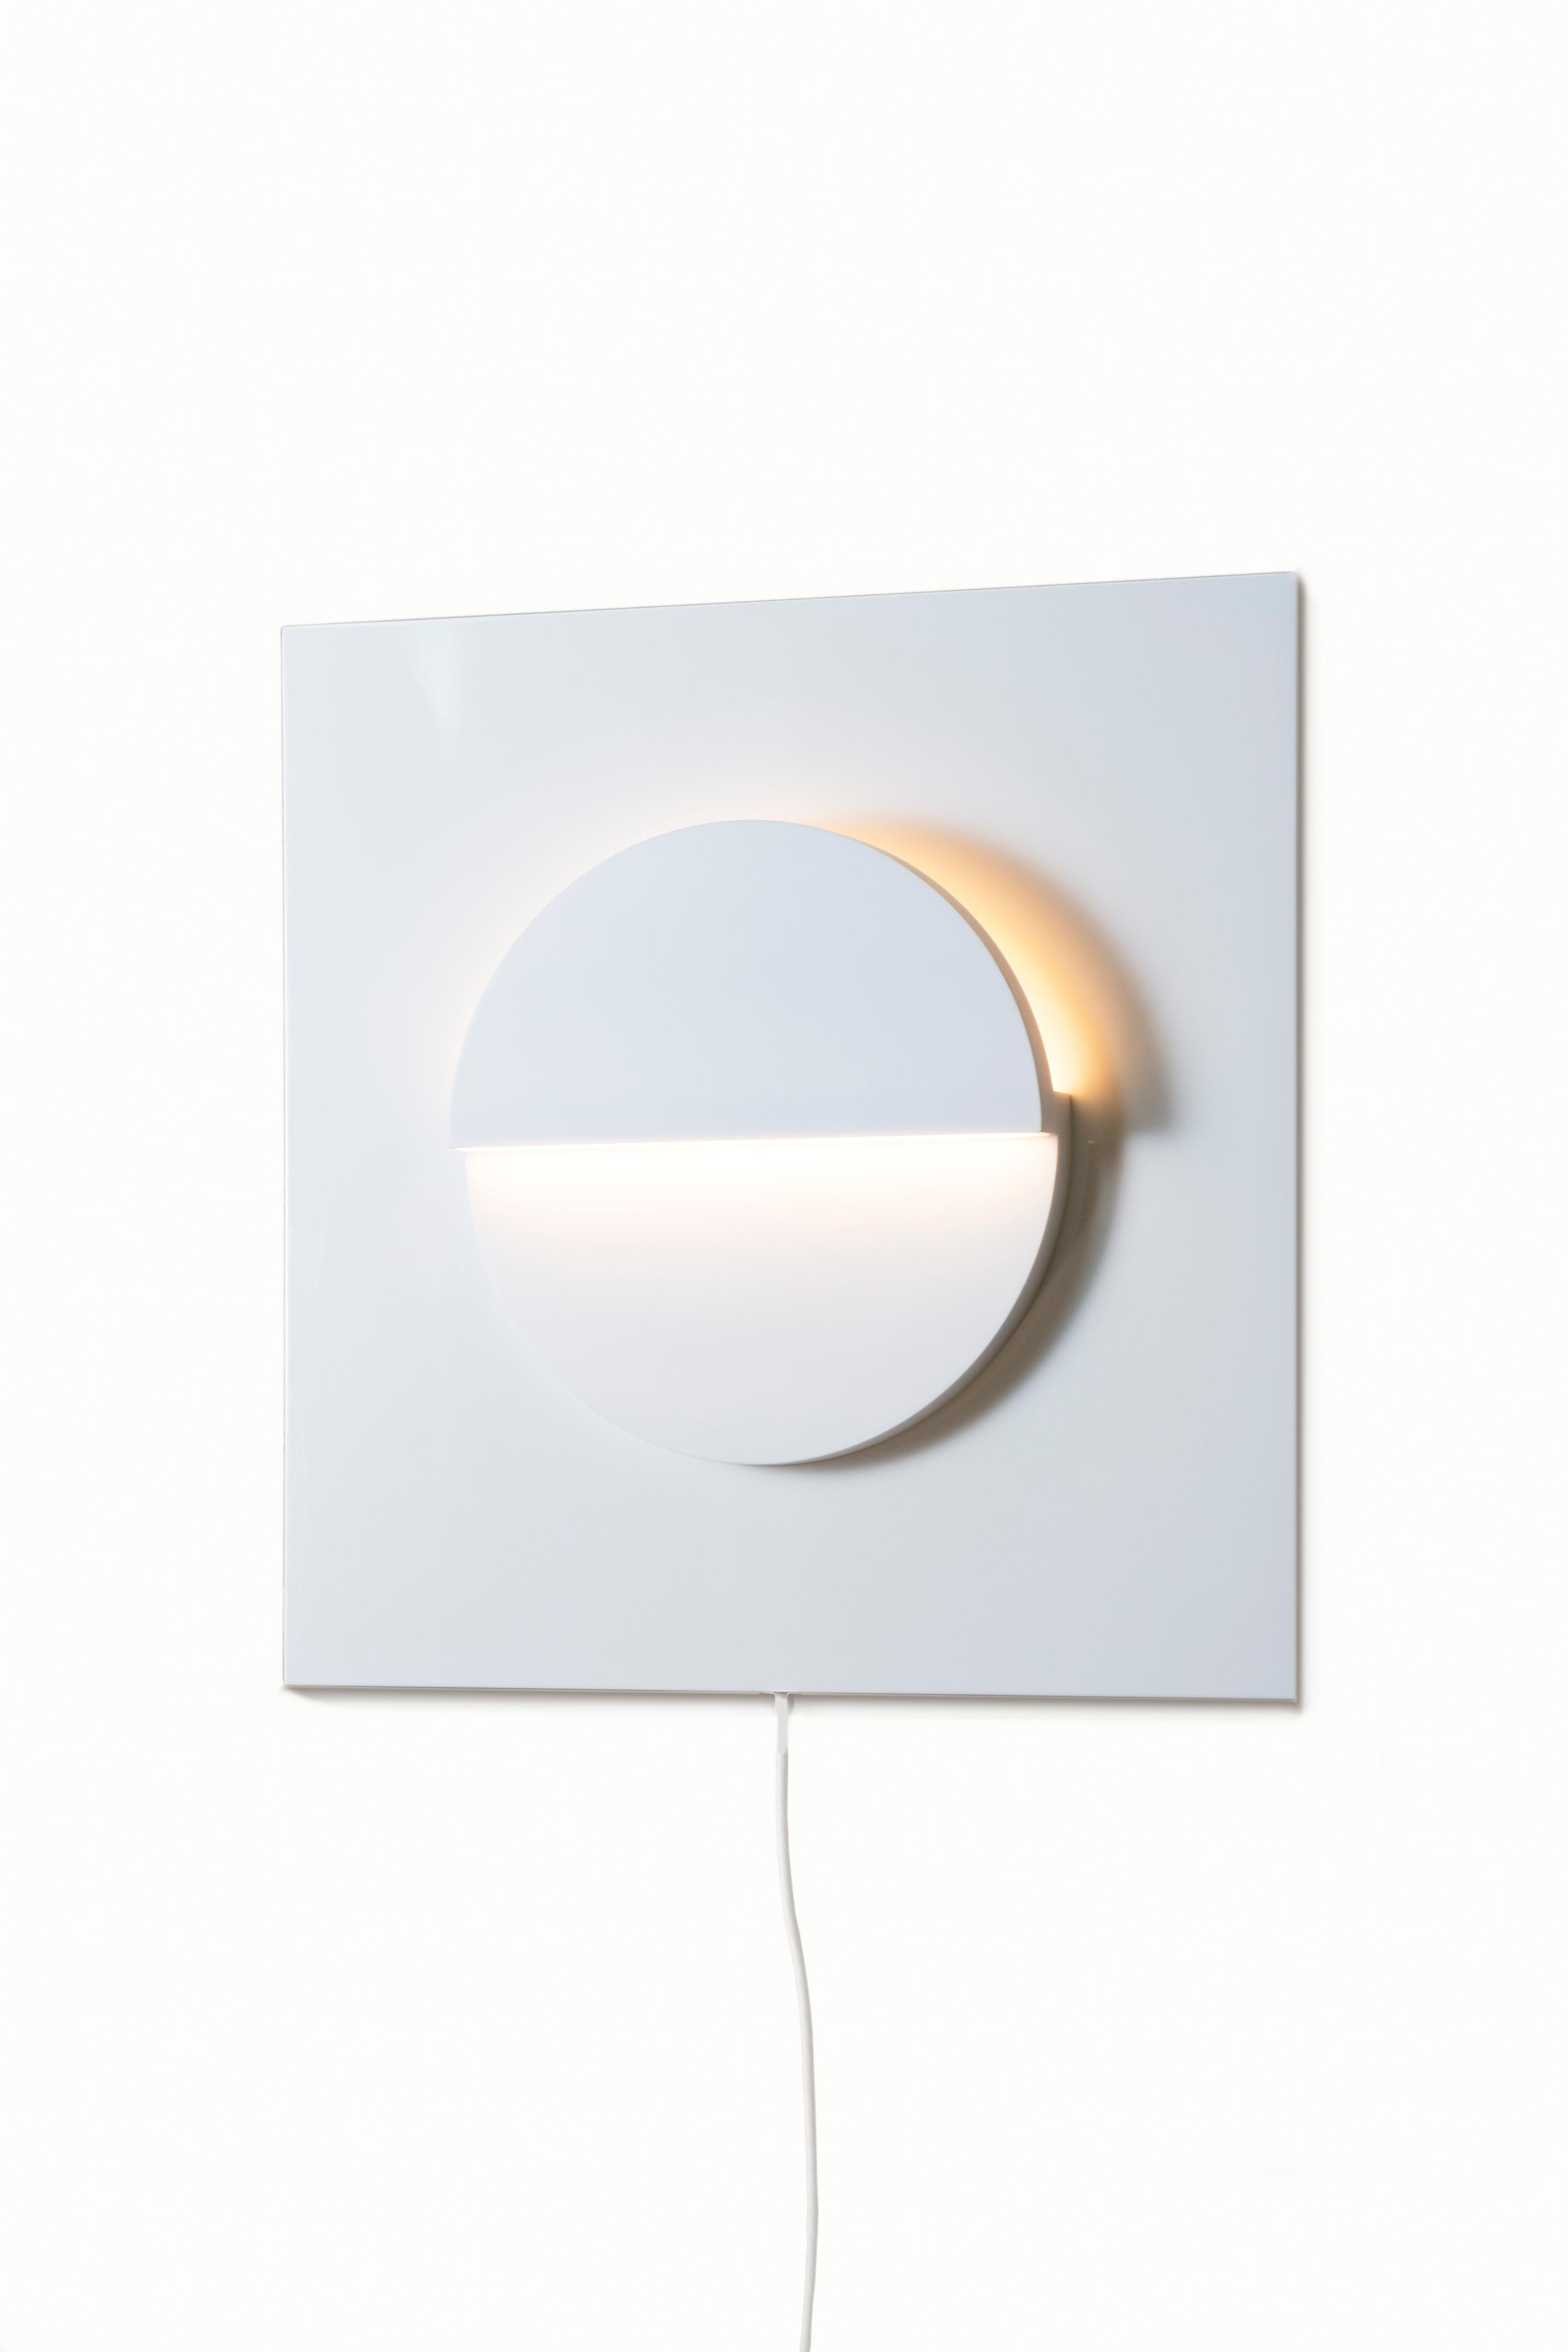 Part of the Cycladic Series, exploring the power of architecture brought to small scale. The framed circle sconce illuminates the purity, symbolism and intimate power of elemental geometric forms expressed in both nature and our manmade world. A